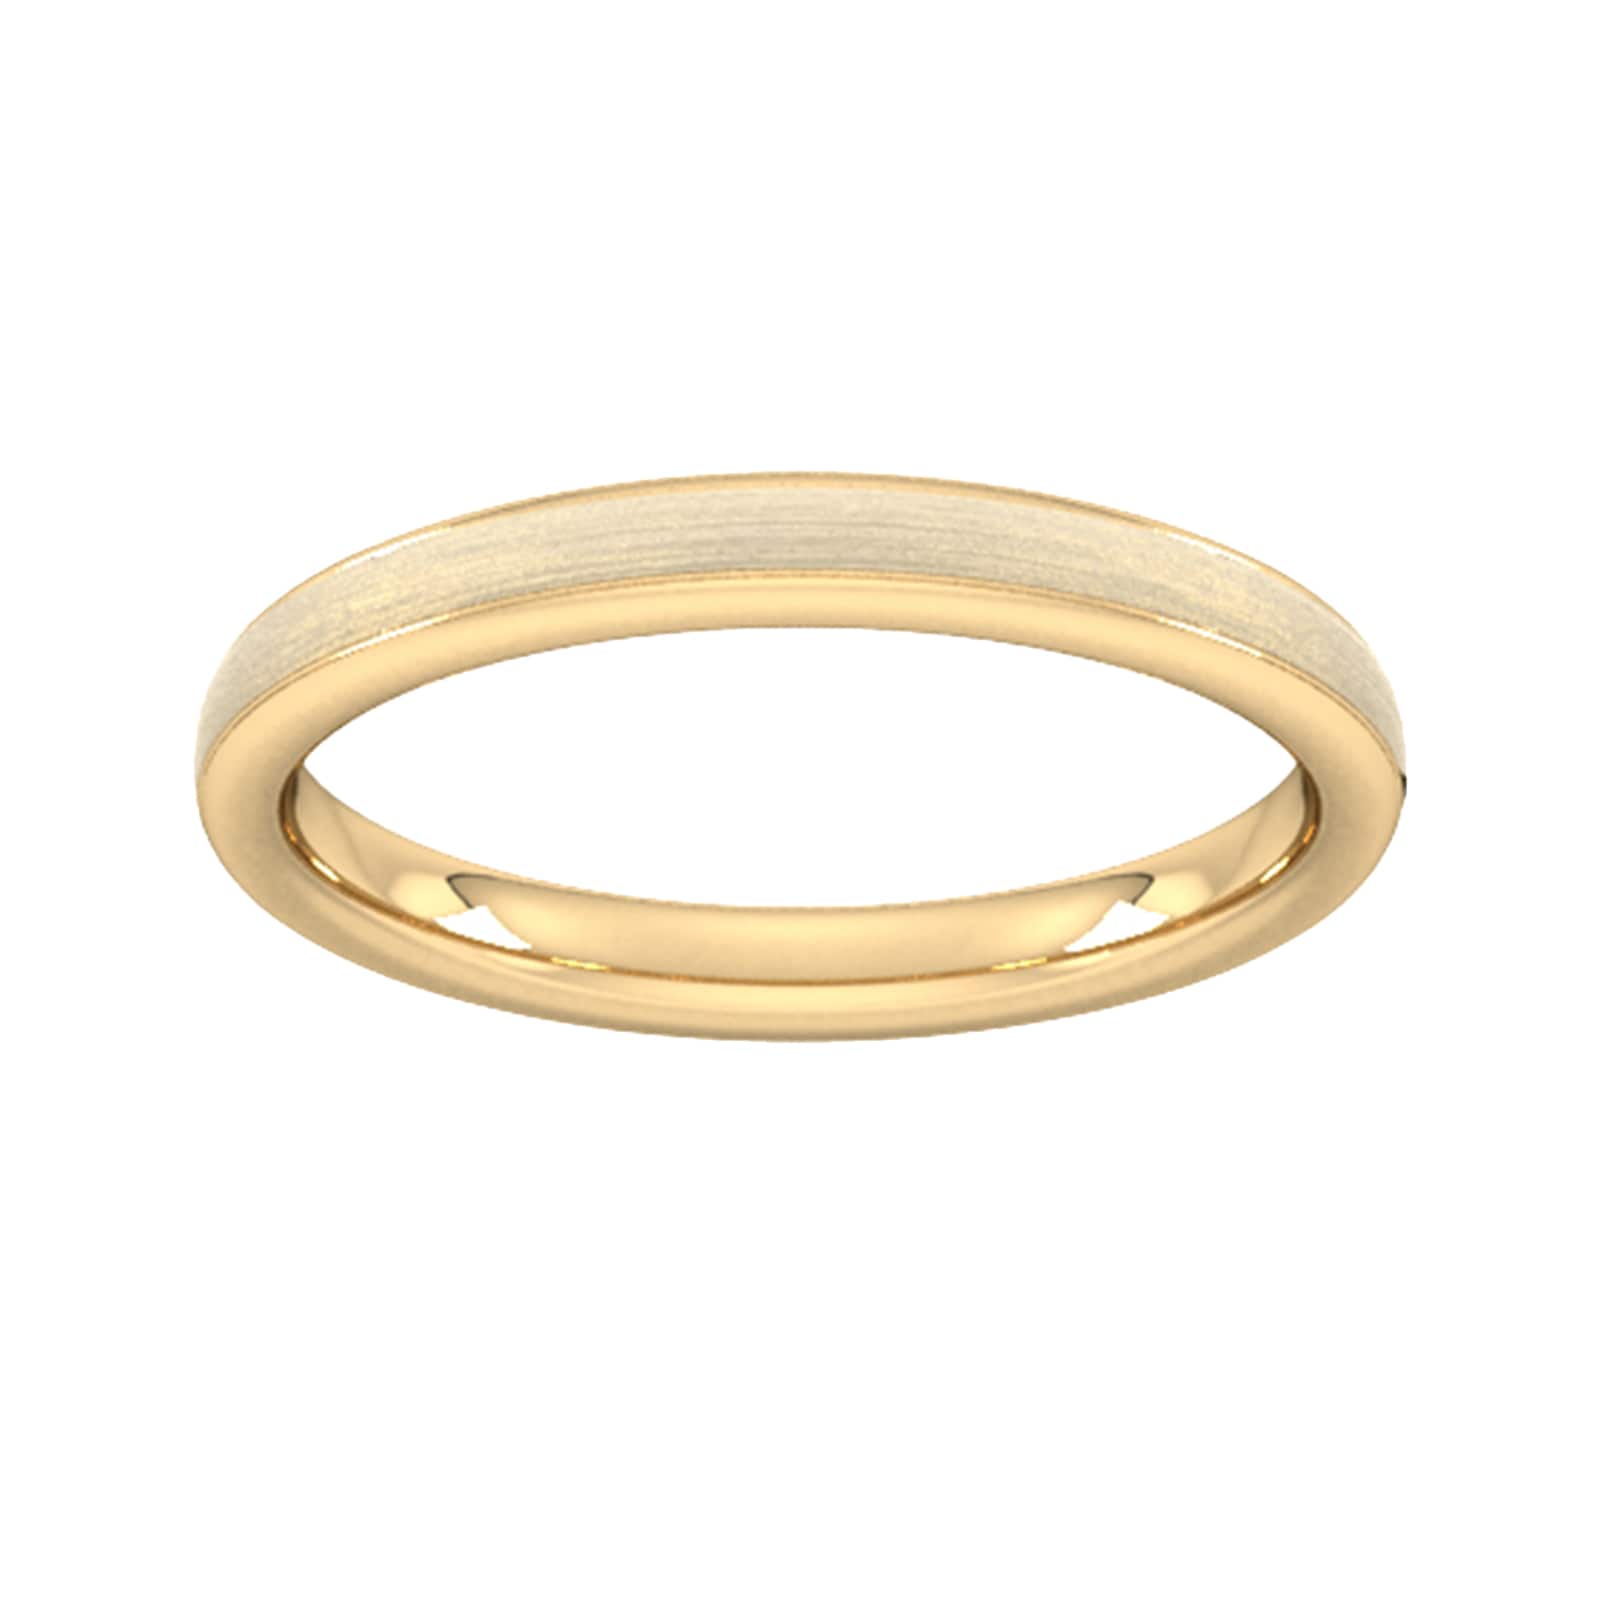 2.5mm D Shape Heavy Matt Centre With Grooves Wedding Ring In 9 Carat Yellow Gold - Ring Size I